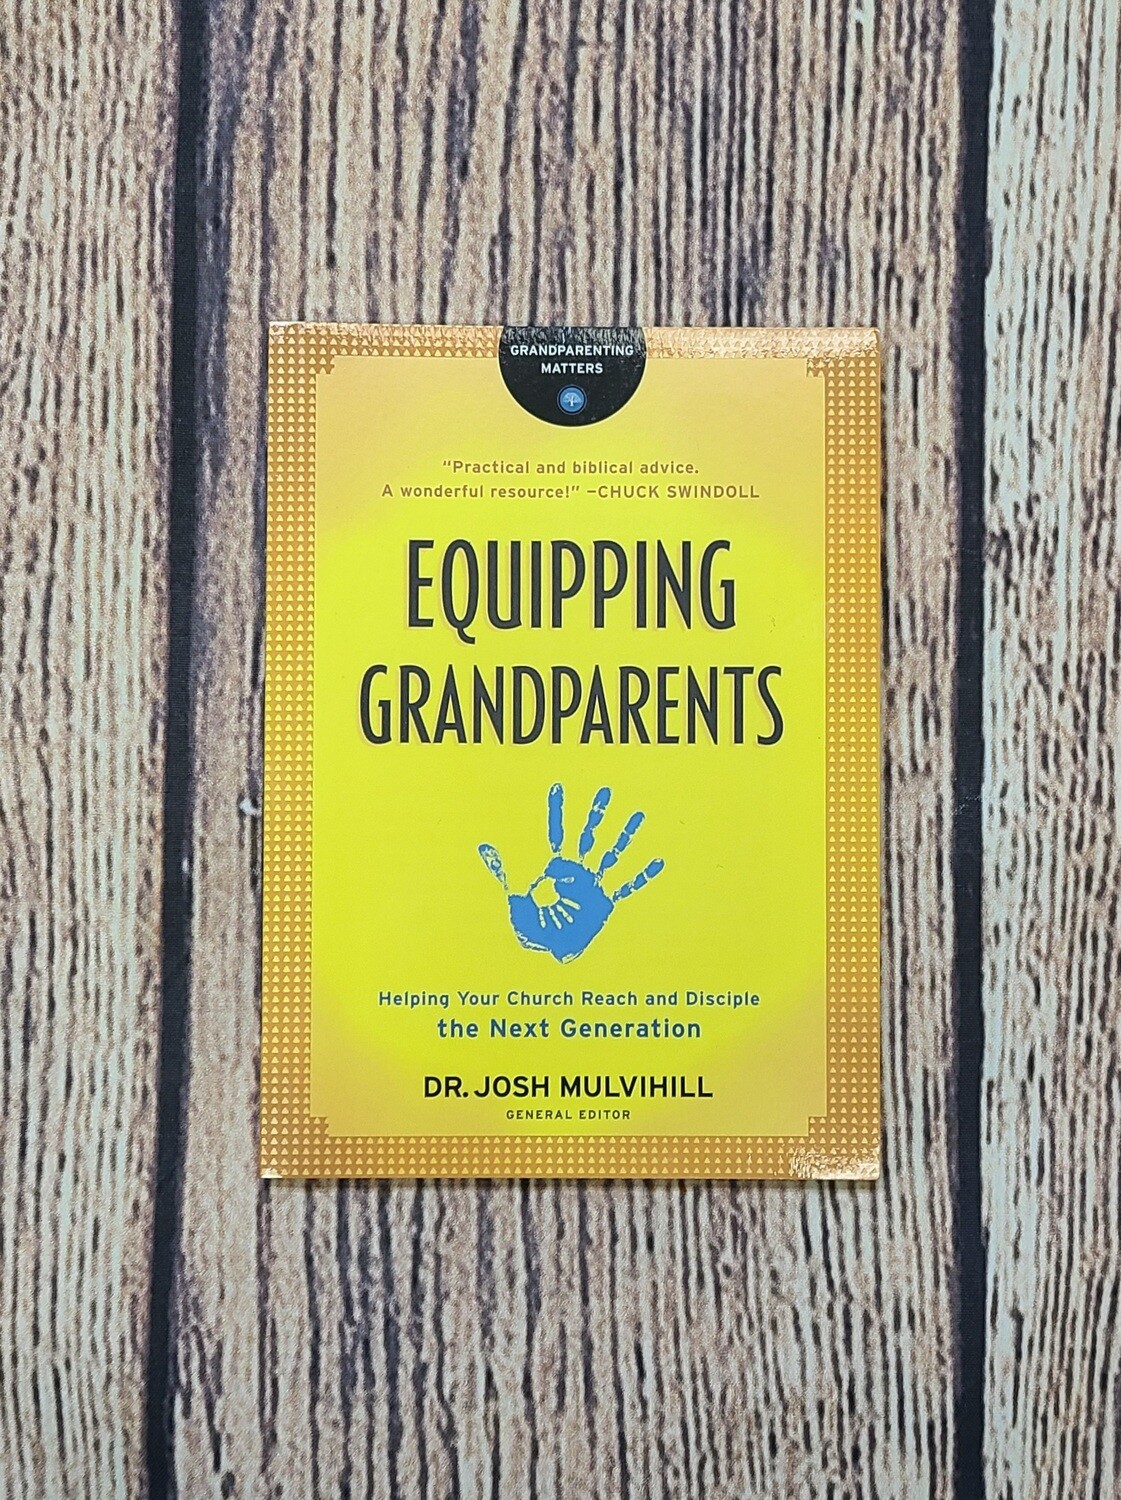 Equipping Grandparents by Dr. Josh Mulvihill